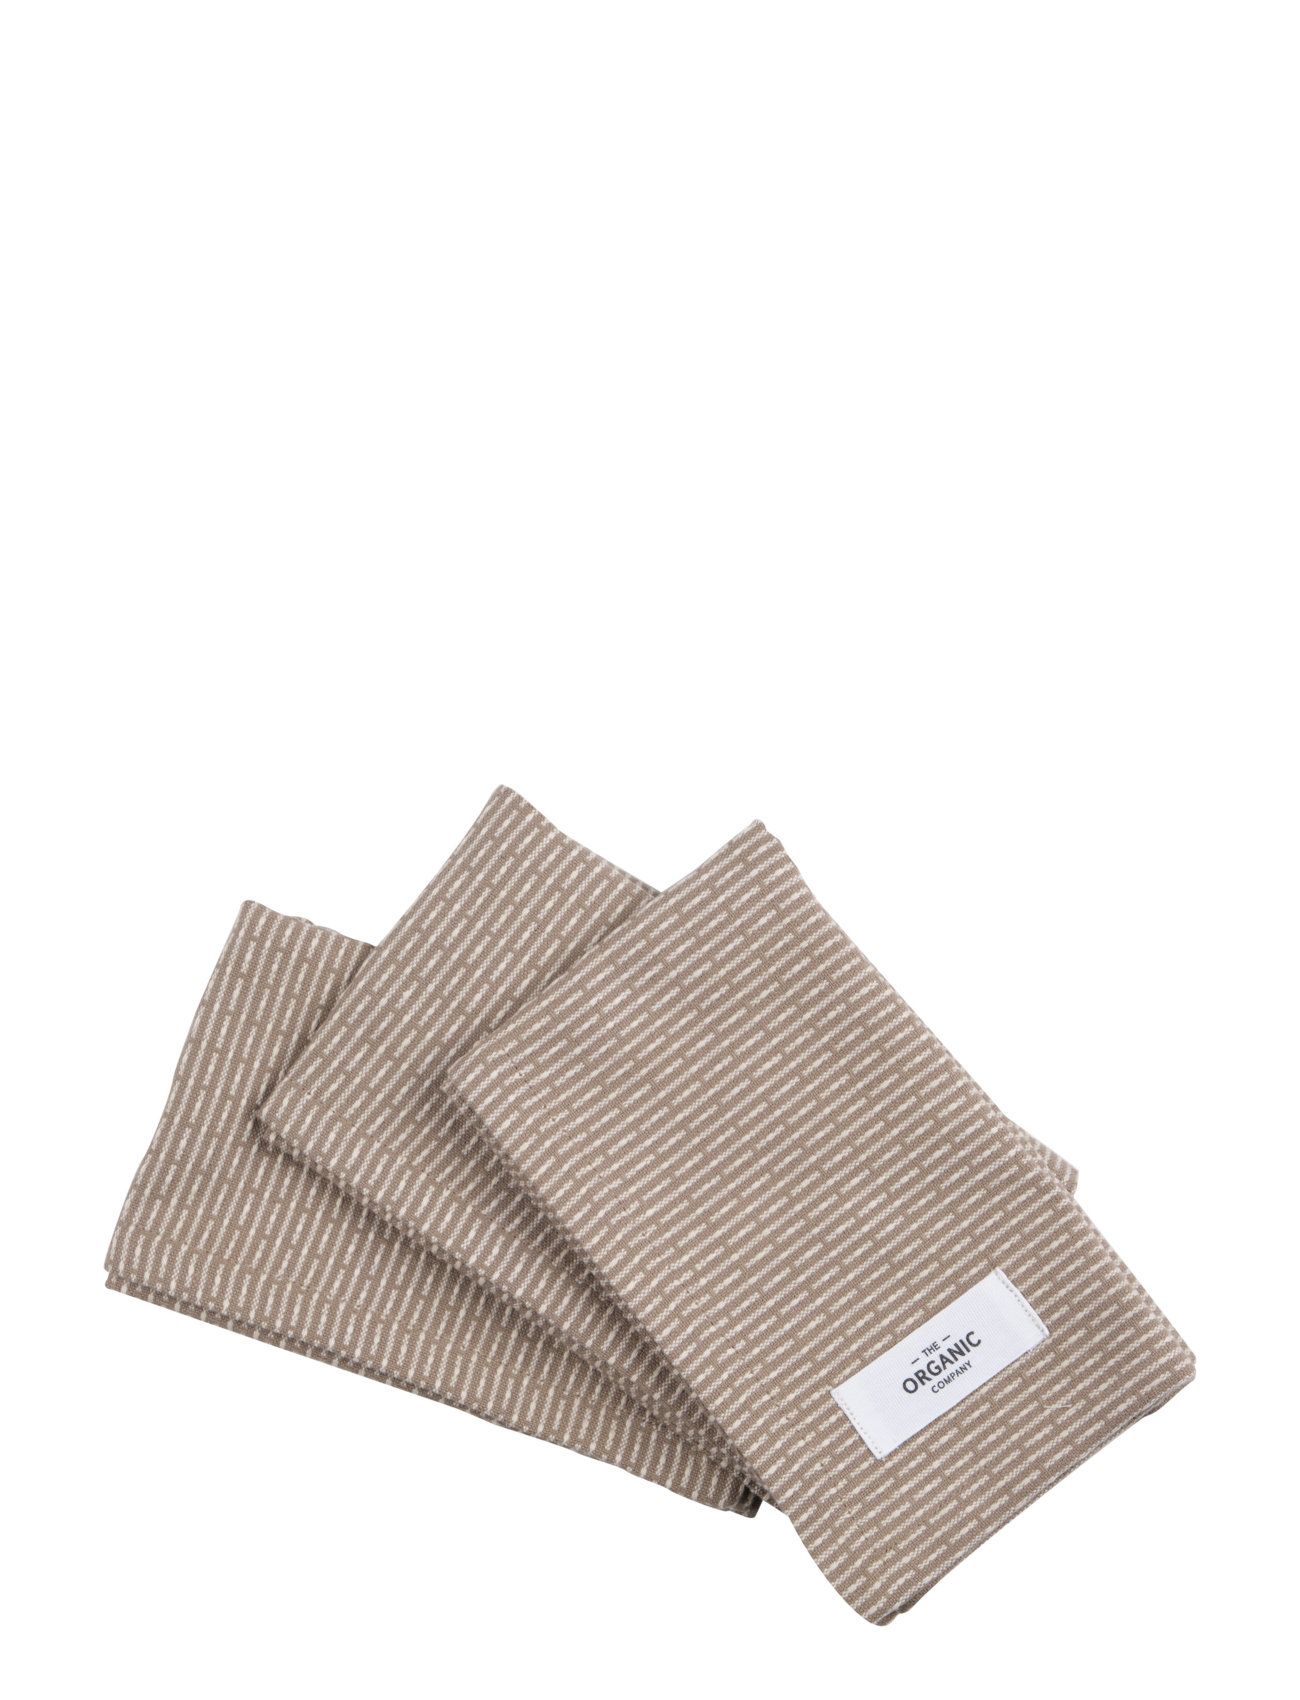 Kitchen Cloths 3 Pack Home Kitchen Wash & Clean Dishes Cloths & Dishbrush Beige The Organic Company